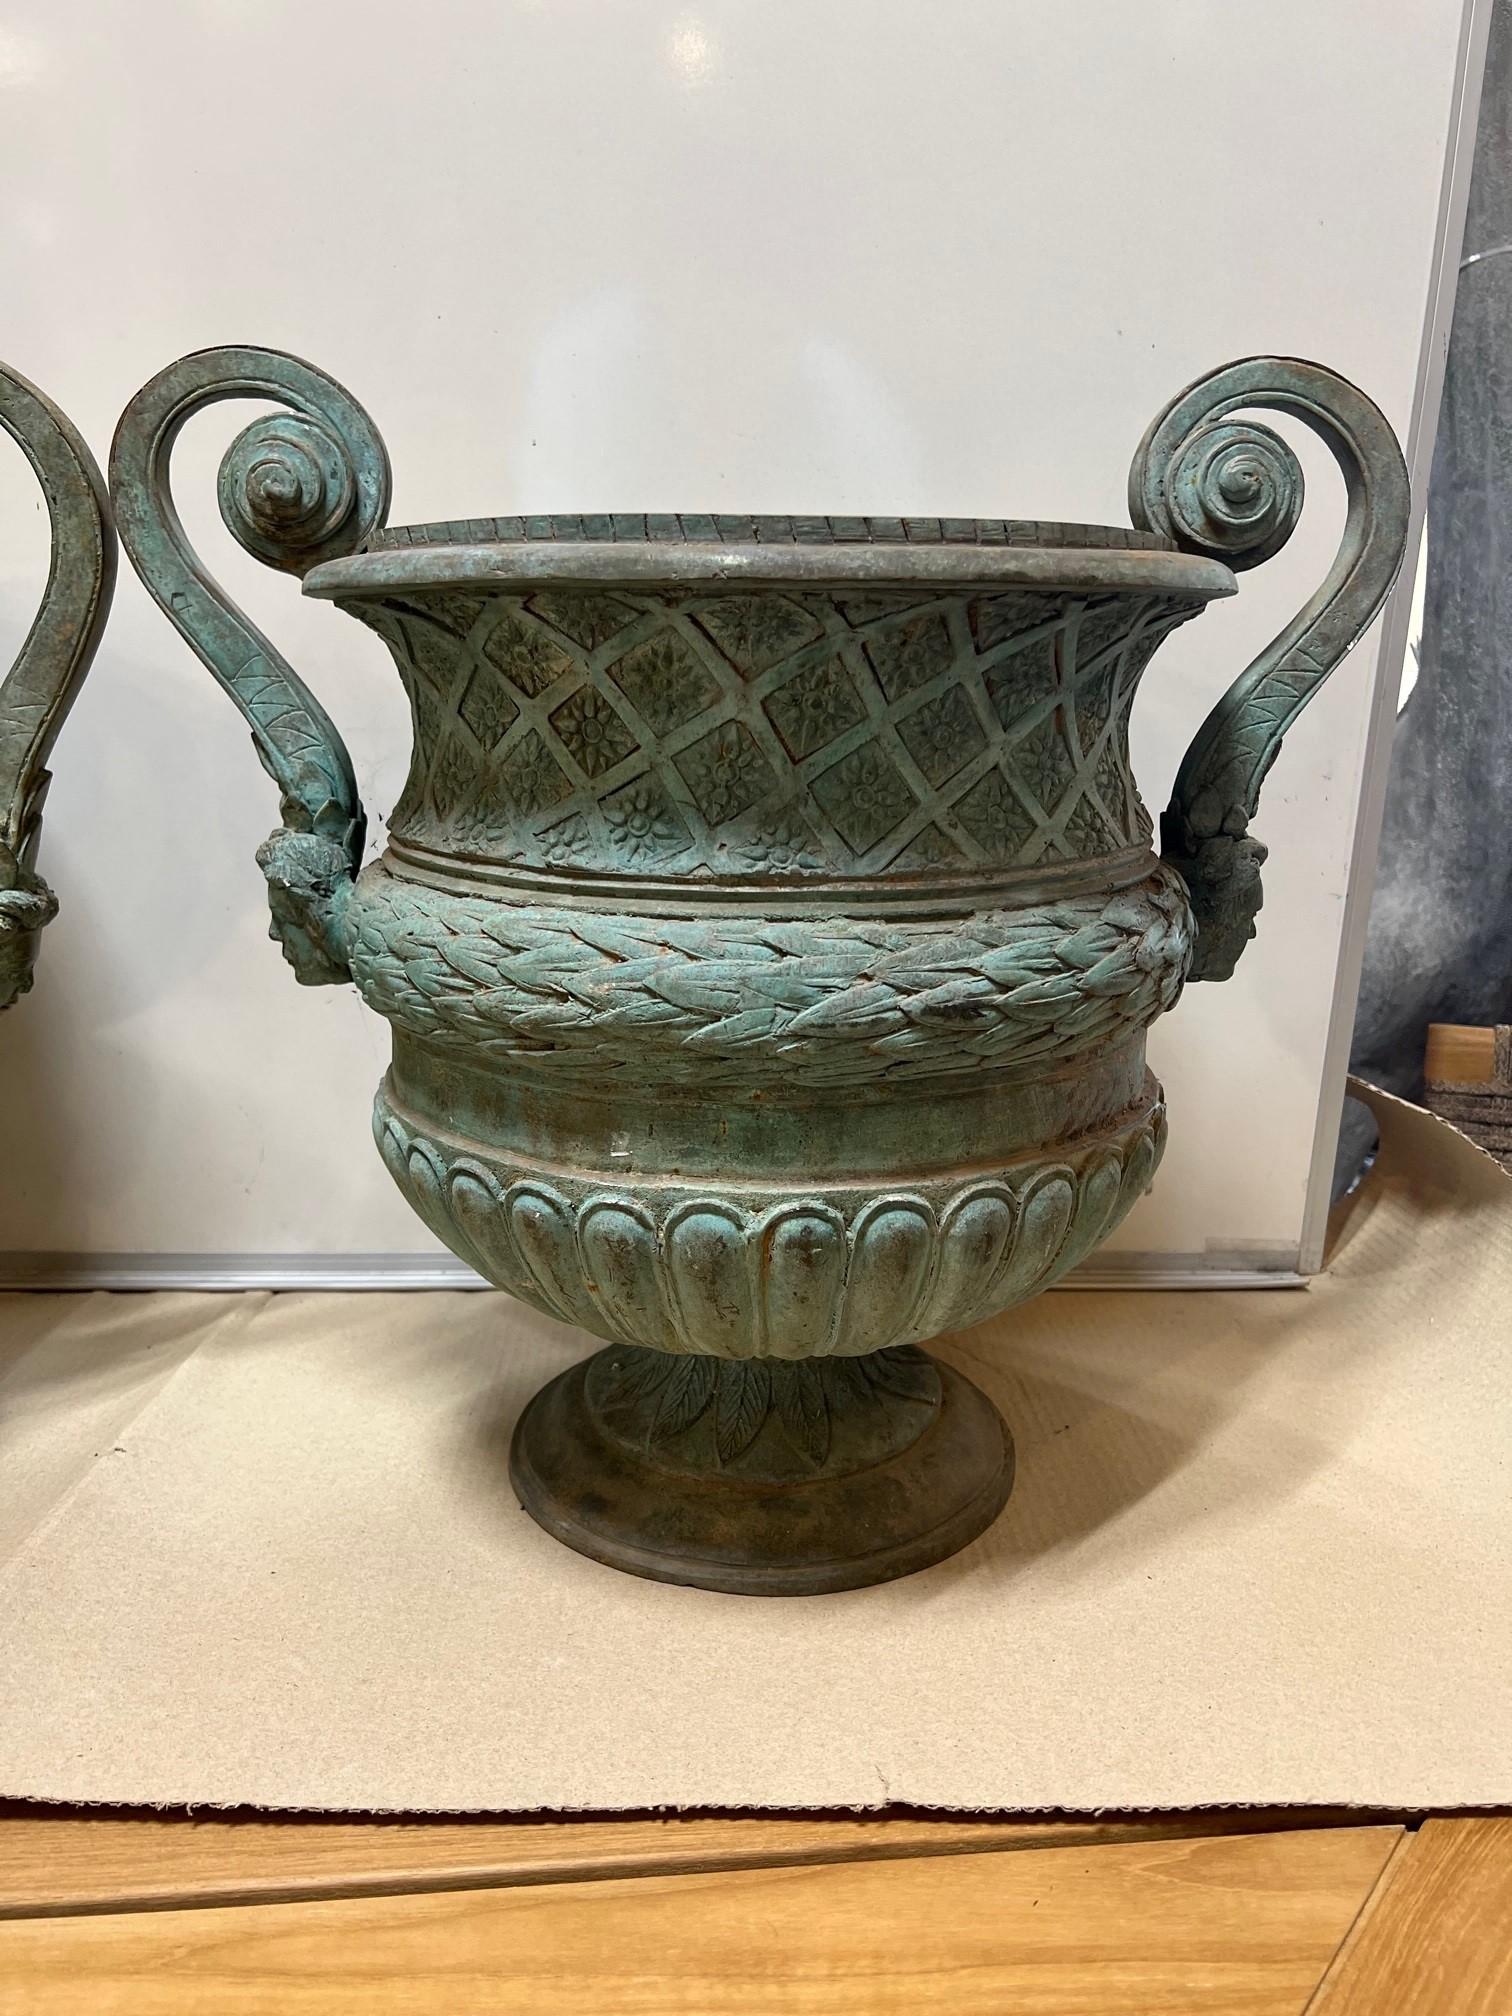 Cast Late 20th Century Pair of Bronze Urns with Handles and a Verde Patina